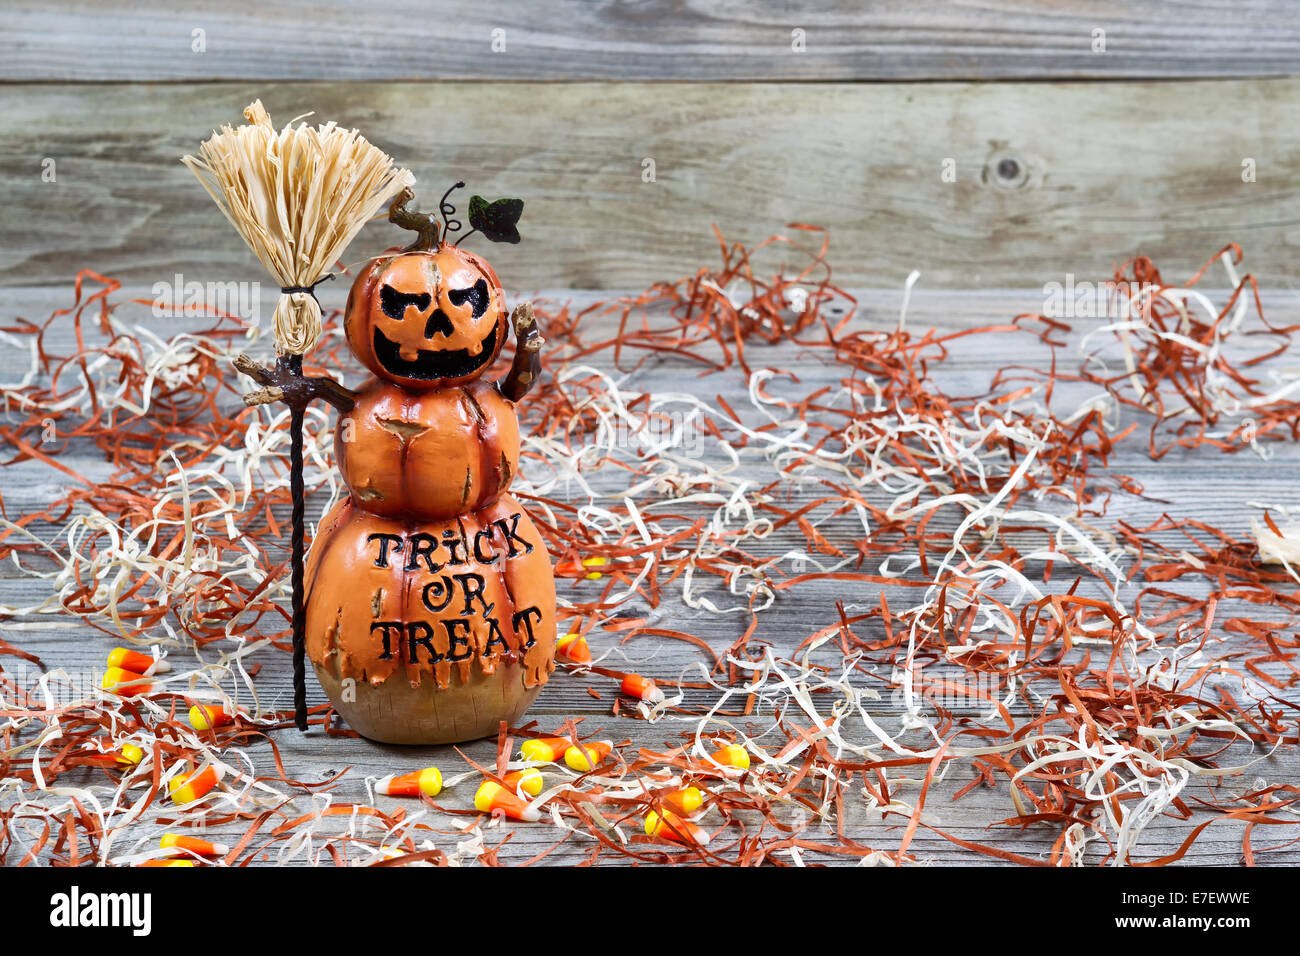 Horizontal image of a scary orange pumpkin figure holding straw broom placed on rustic wooden boards Stock Photo